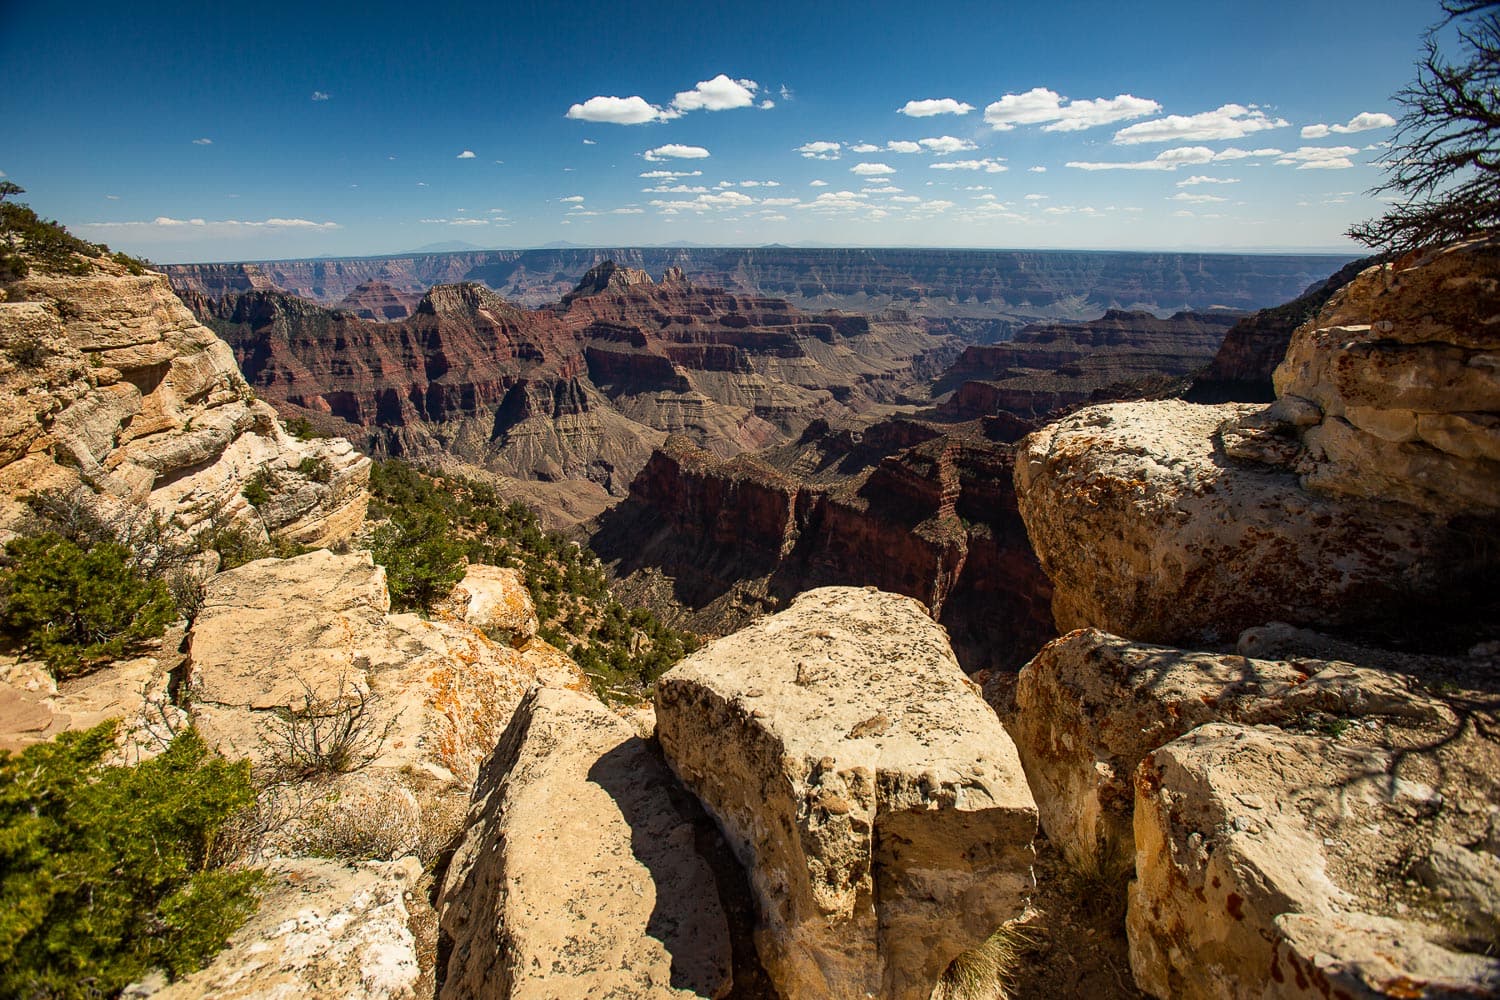 The north rim of the grand canyon is a vast overlook.